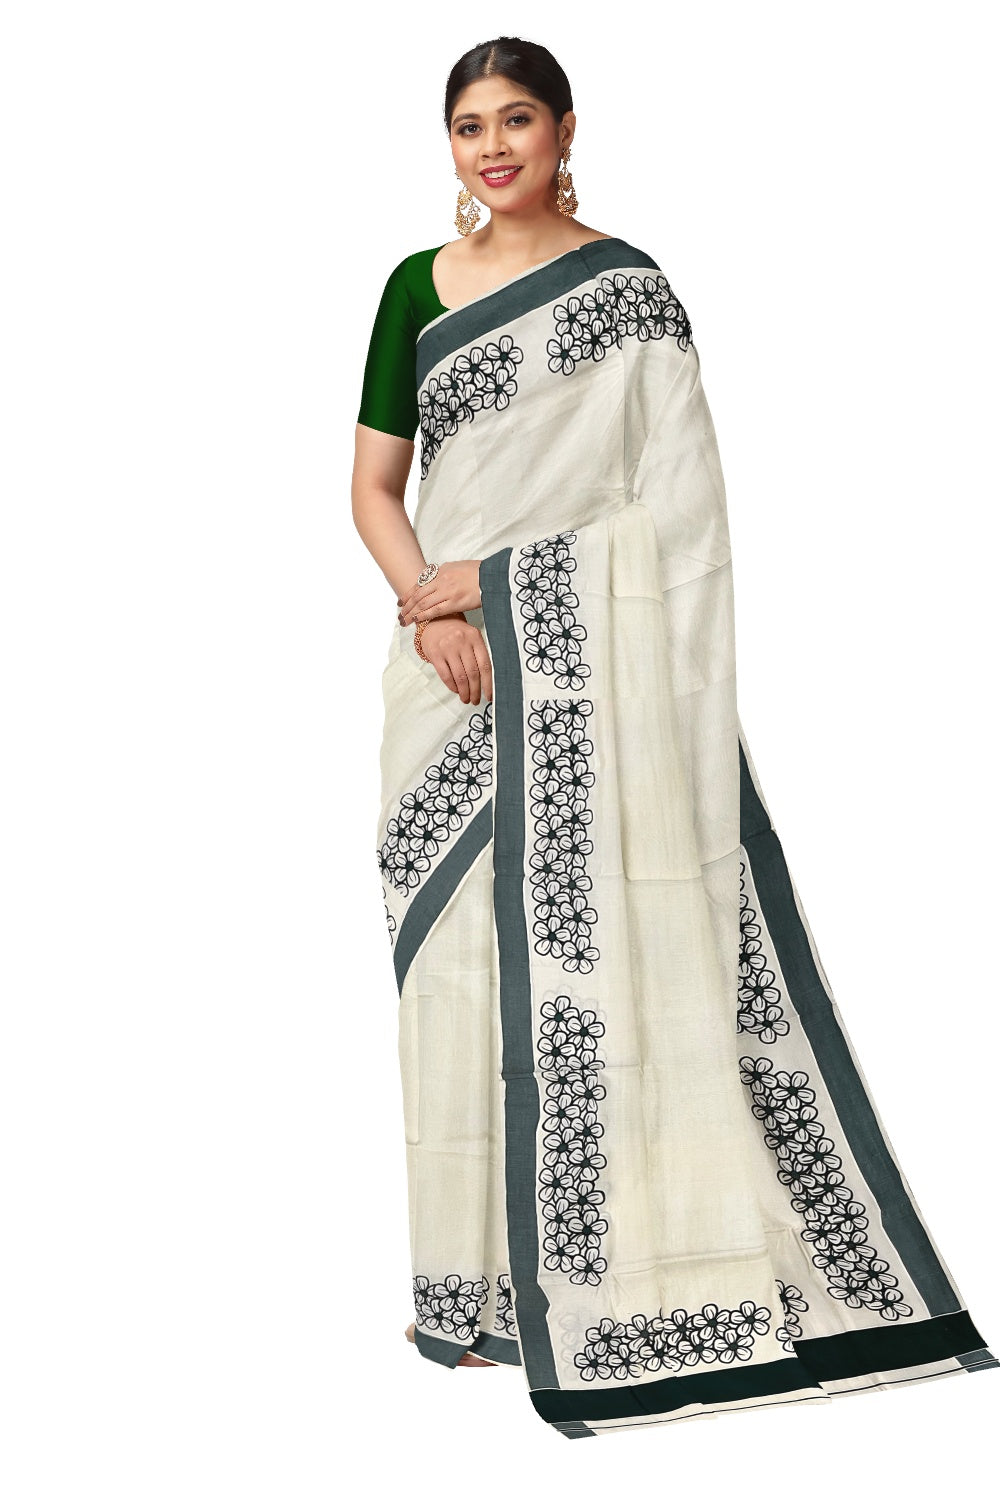 Buy Kota Silk Temple Black Border Ethnic Wear Saree For Women's With  Running Blouse (White) at Amazon.in